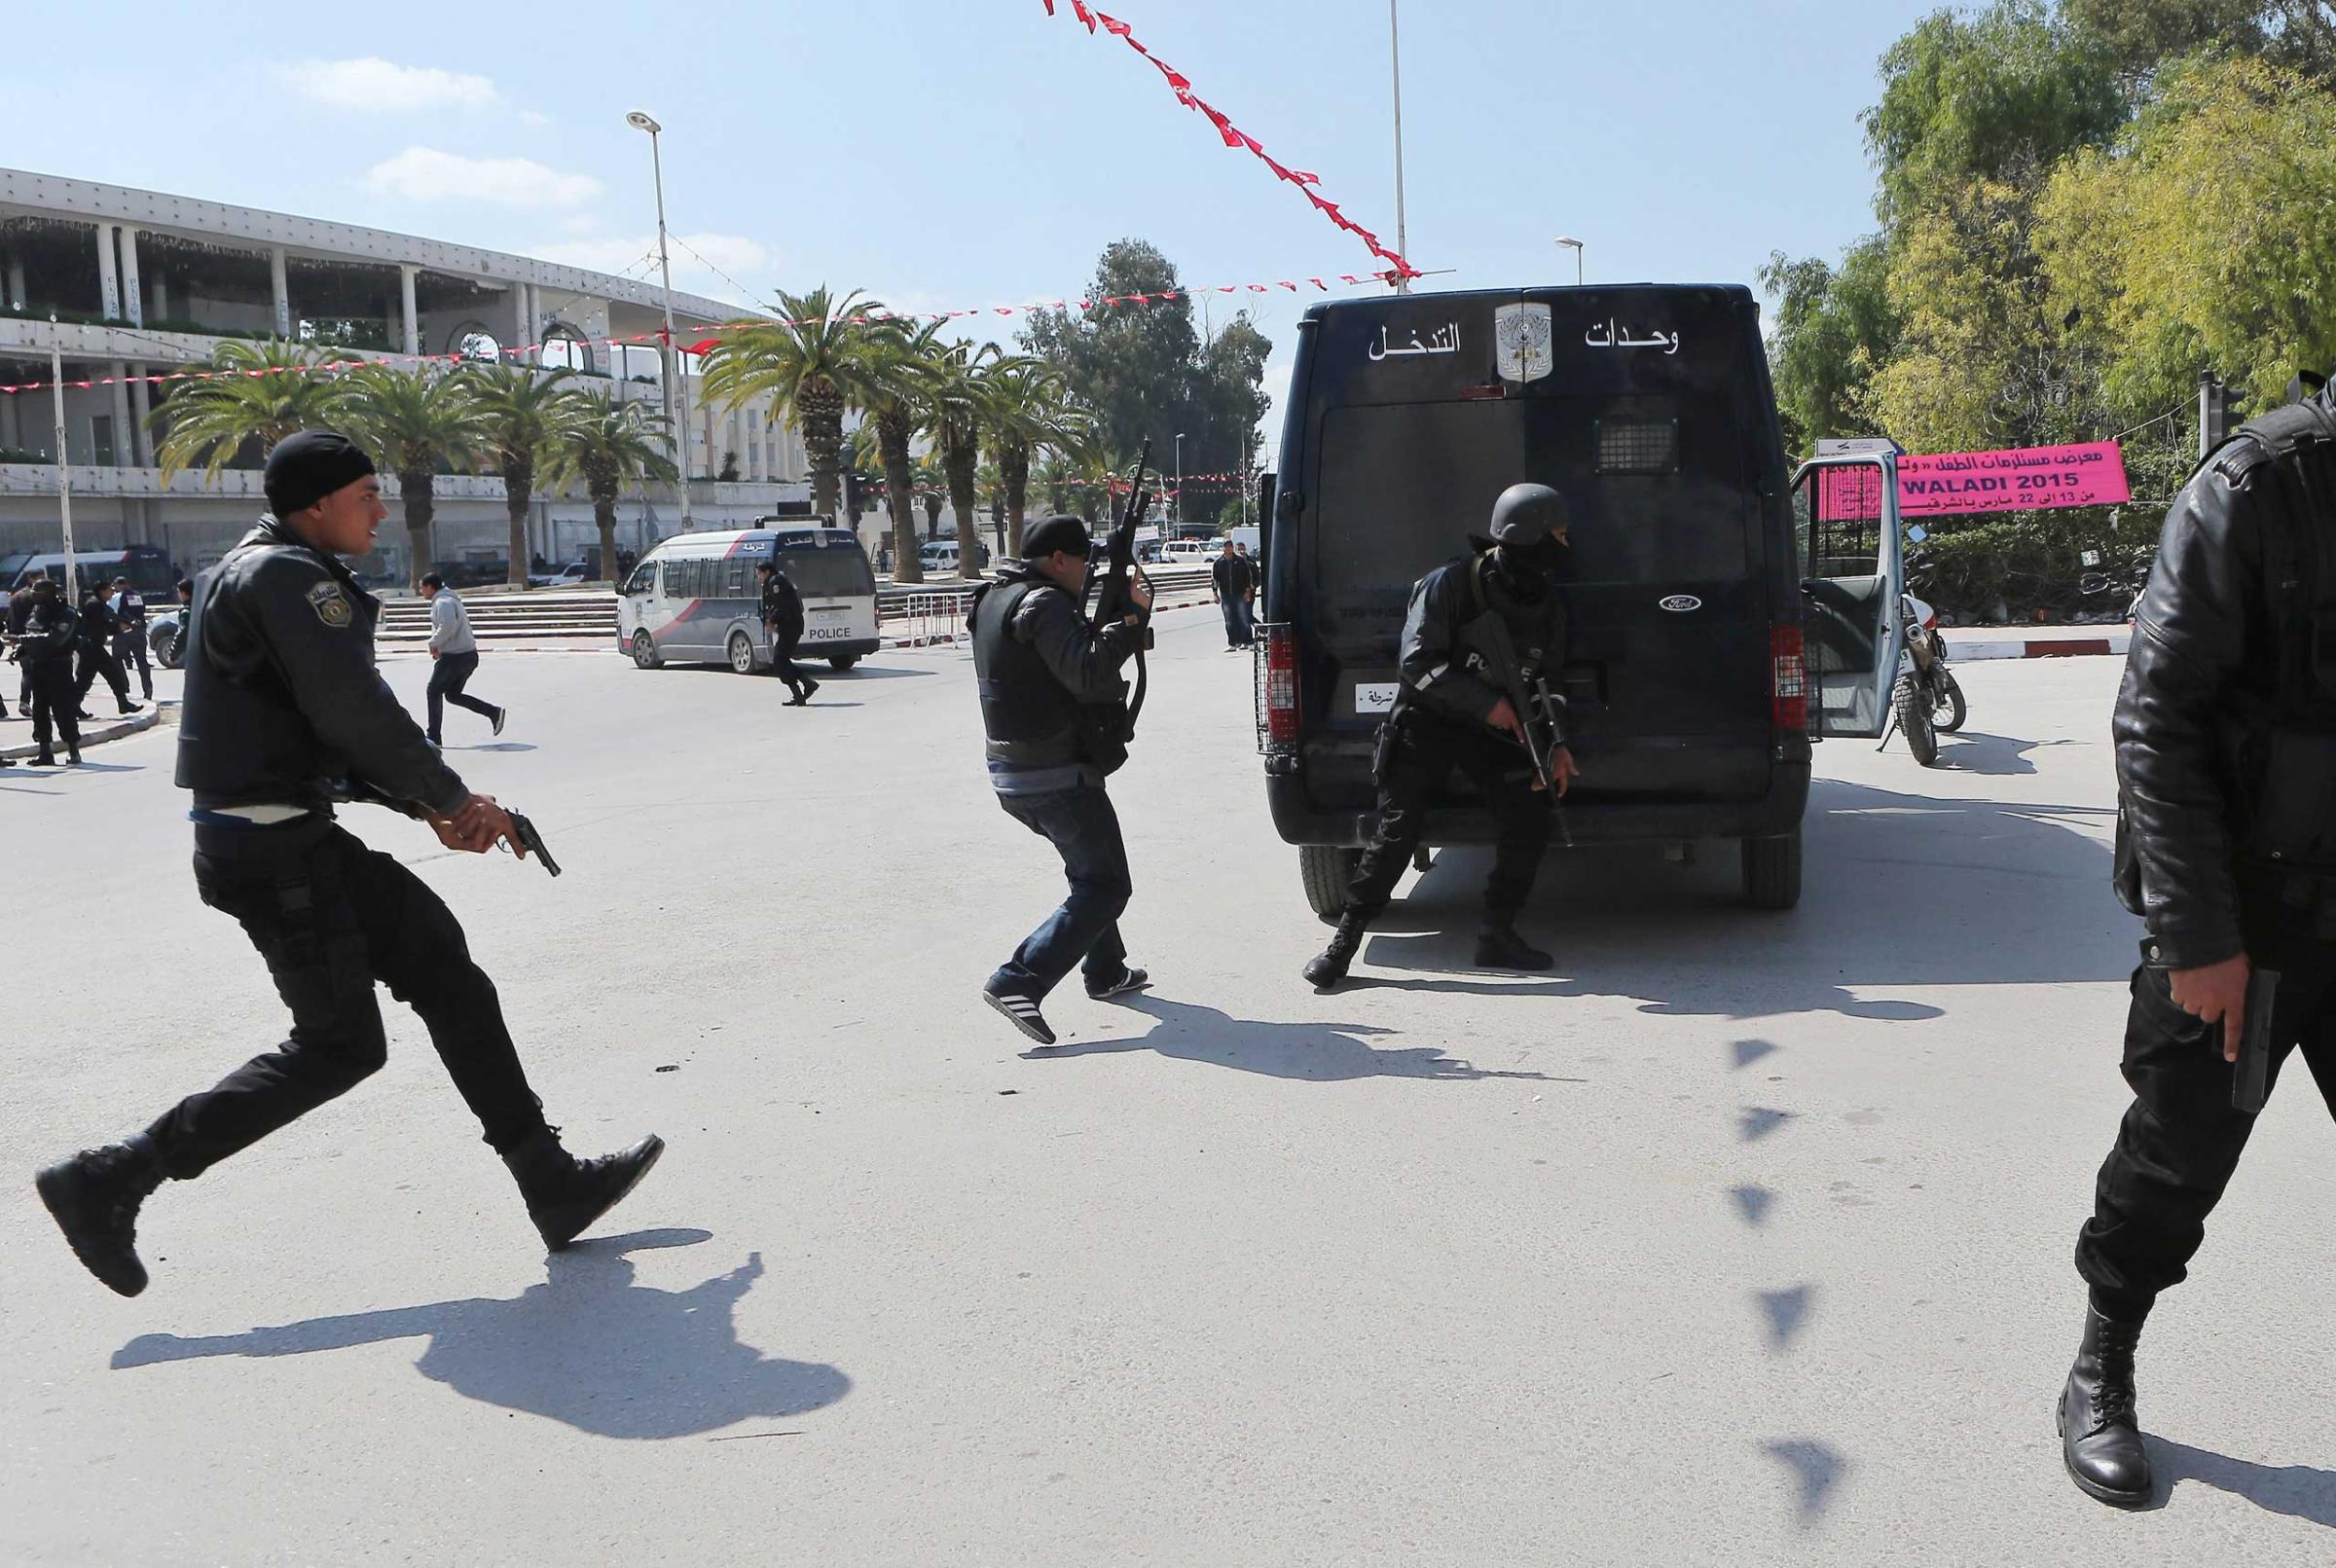 Members of the Tunisian security services take up a position after gunmen reportedly took hostages near the country's parliament, outside the National Bardo Museum, Tunis, March 18, 2015.